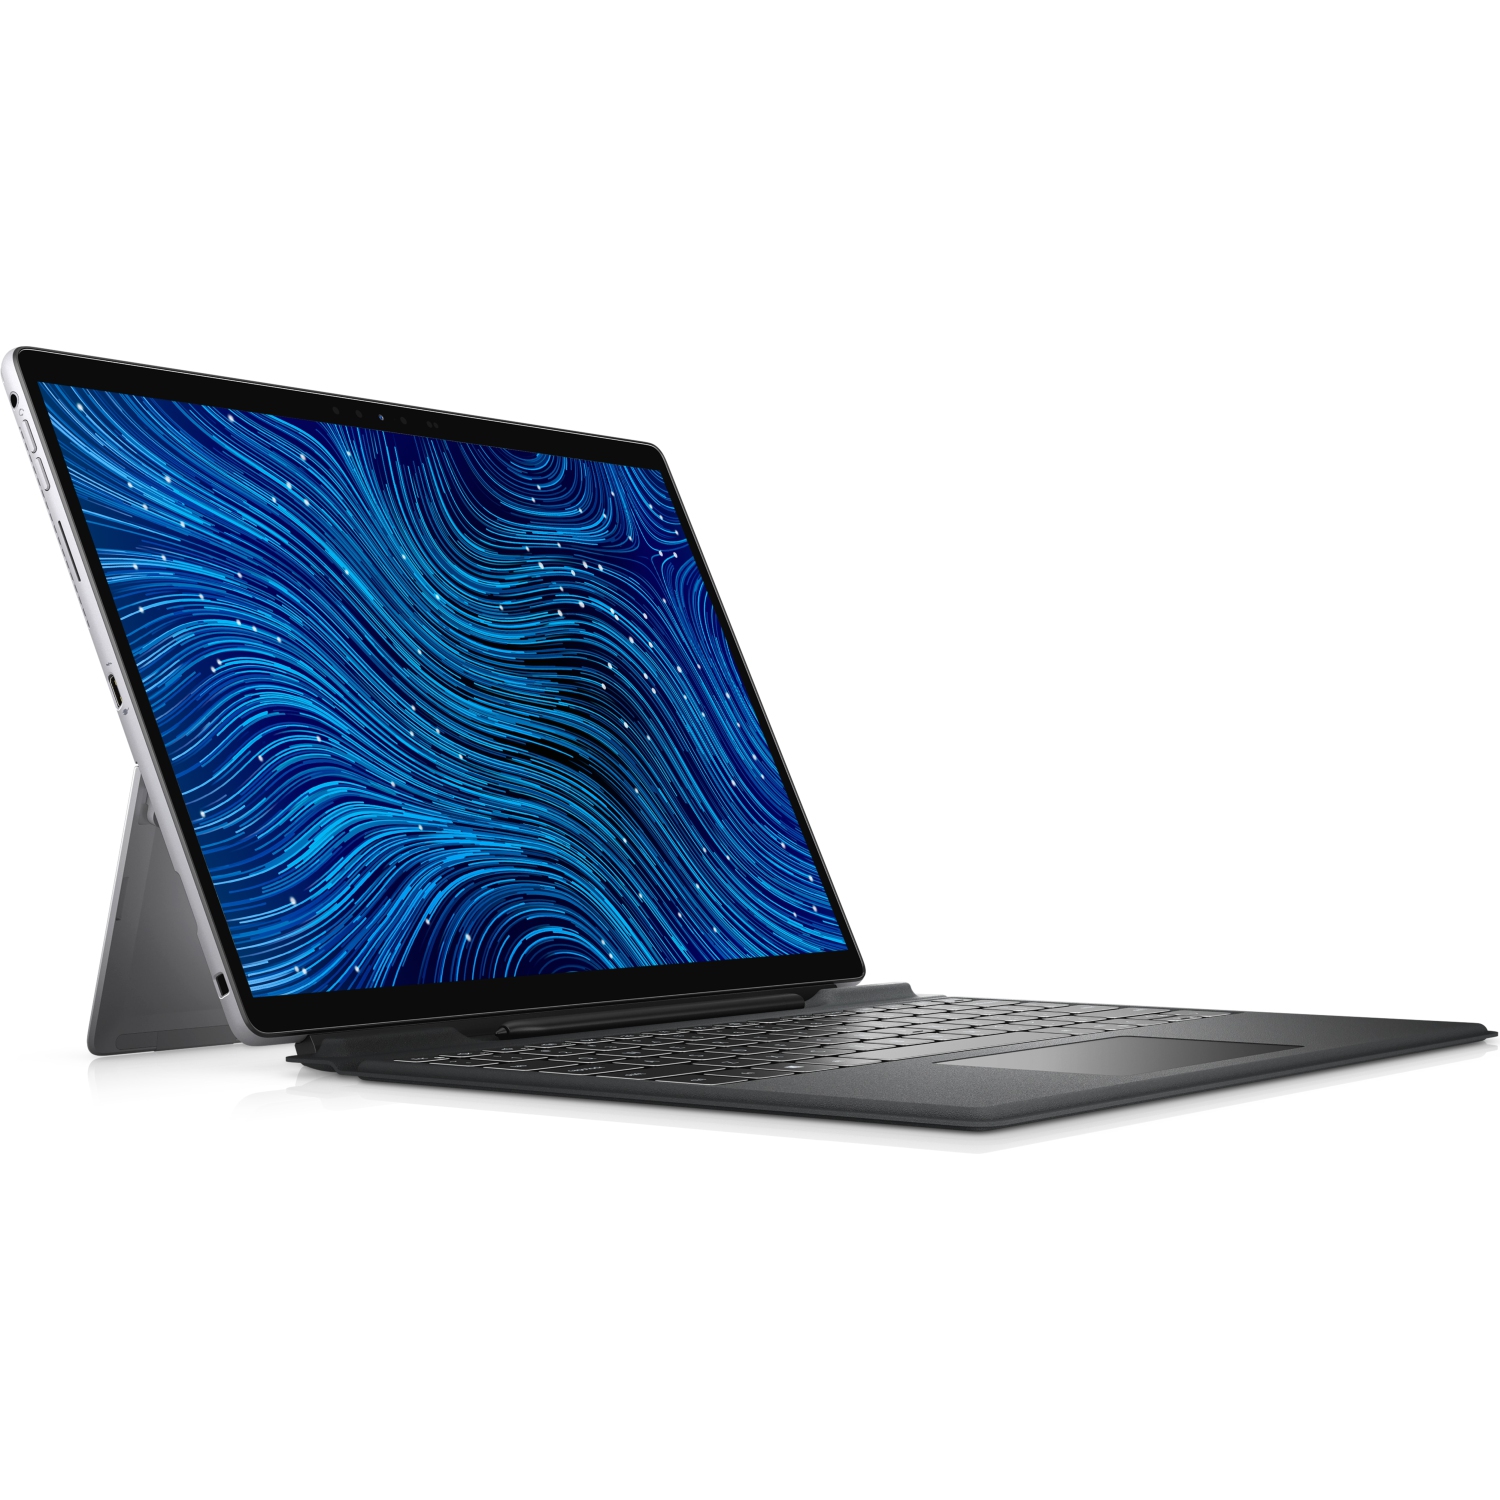 Refurbished (Excellent) - Dell Latitude 7000 7320 Detachable 13 2-in-1 (2021), 13" FHD+ Touch, Core i7, 512GB SSD, 16GB RAM, 4 Cores @ 4.6 GHz, 11th Gen CPU Certified